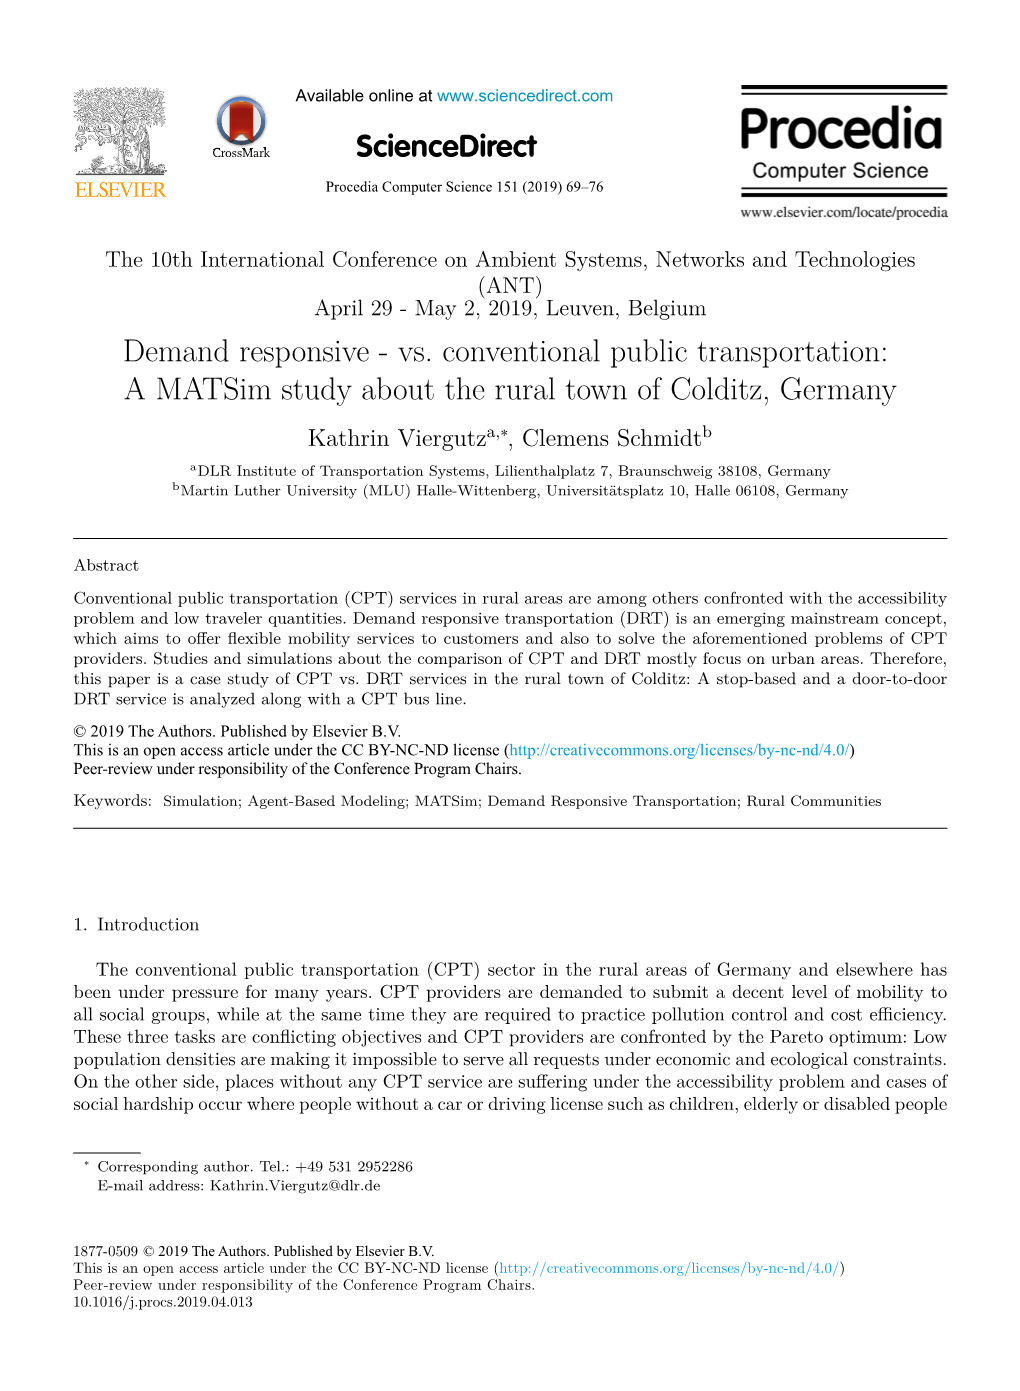 A Matsim Study About the Rural Town of Colditz, Germany